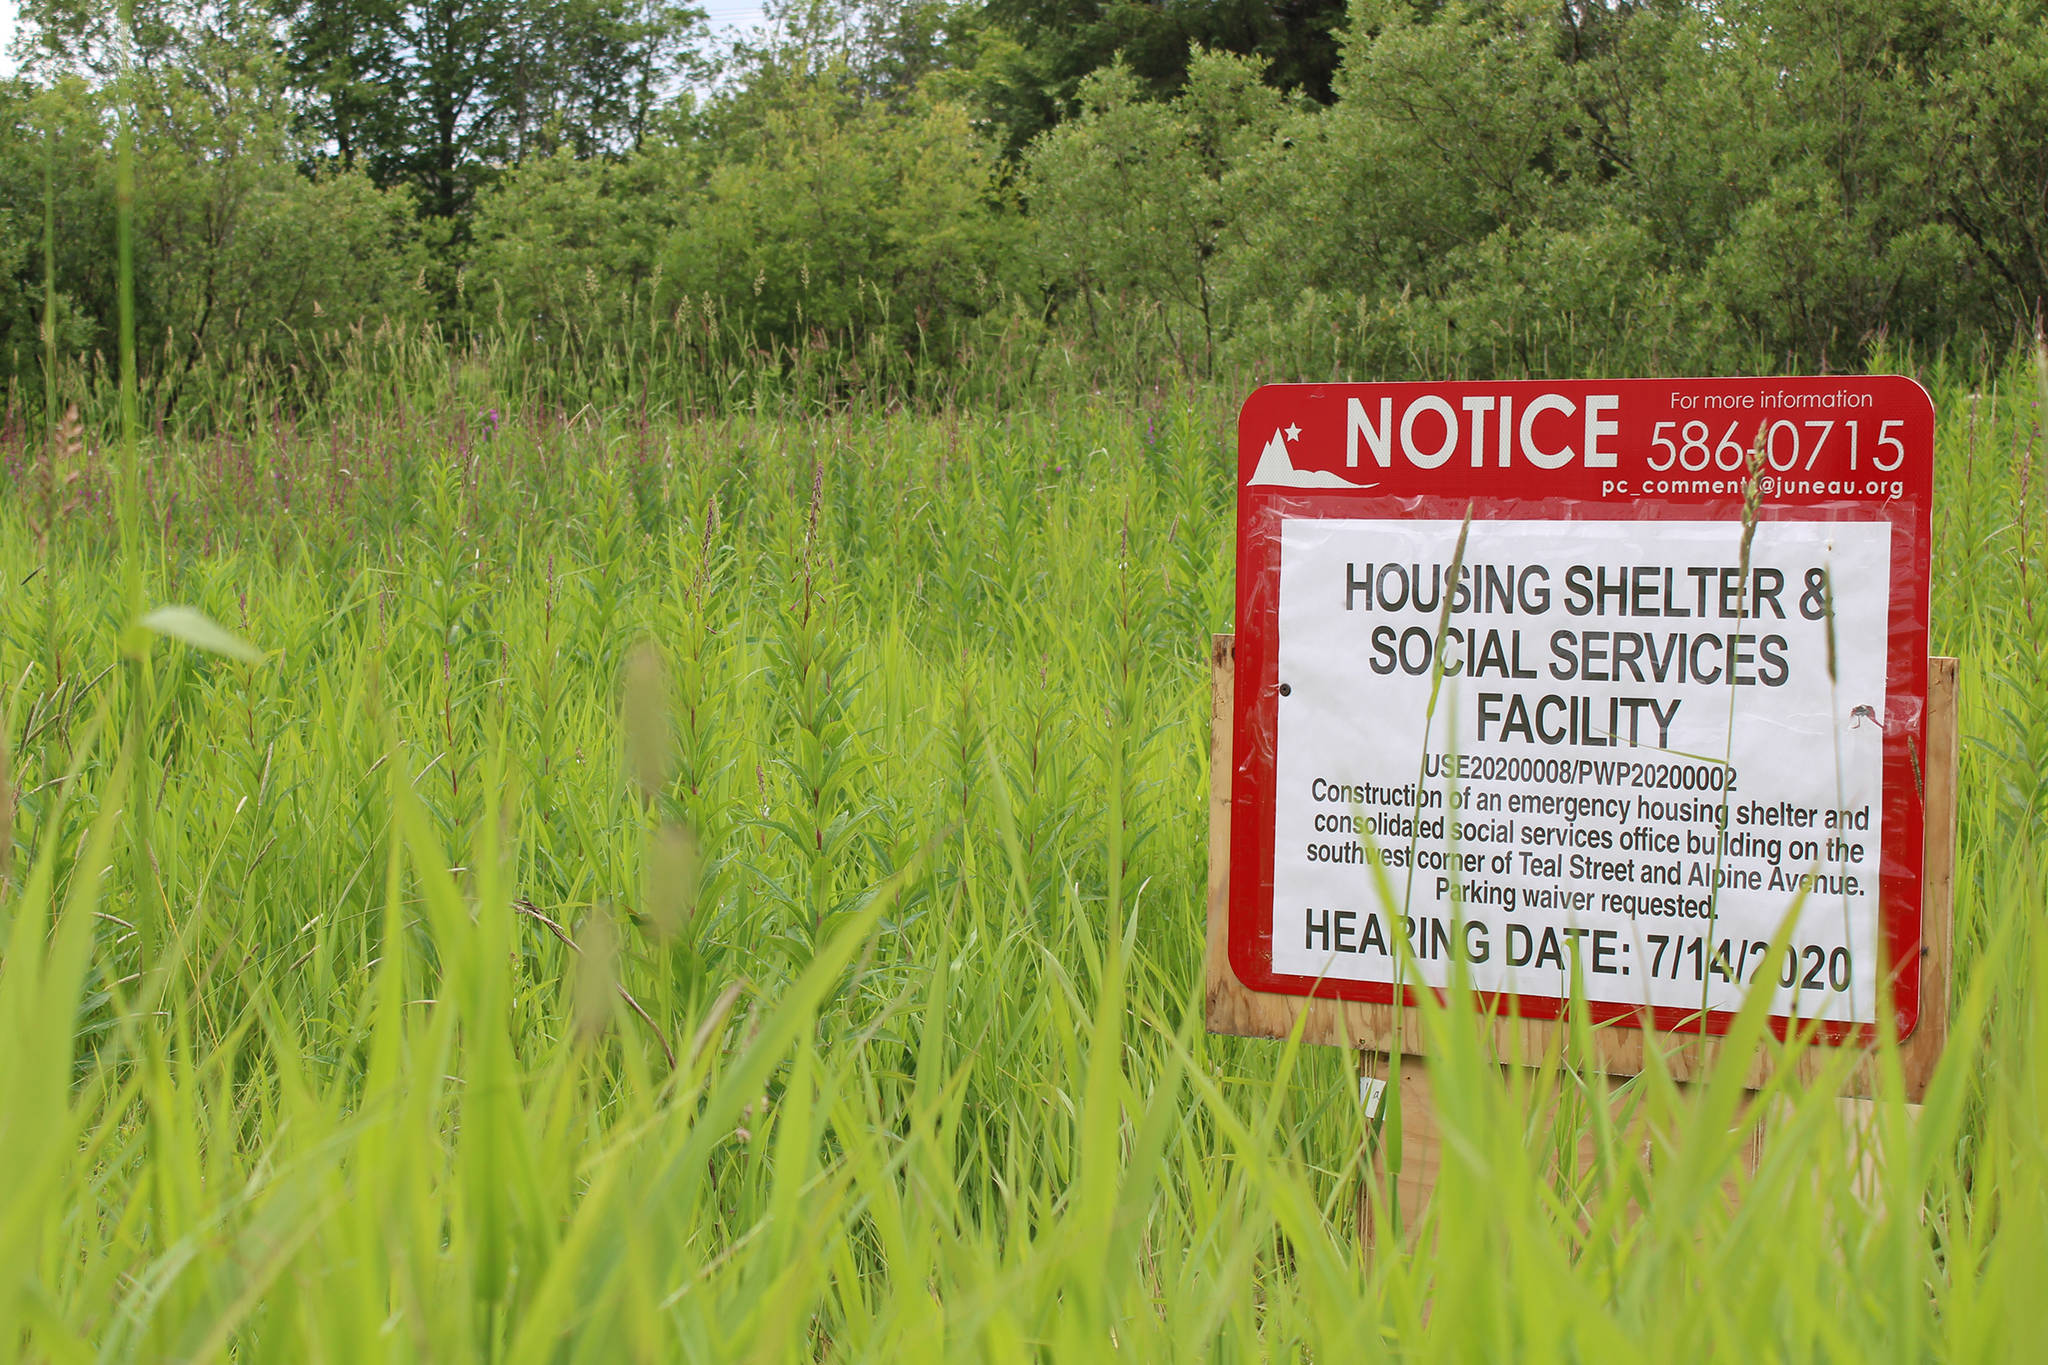 Permits are next step for social service campus